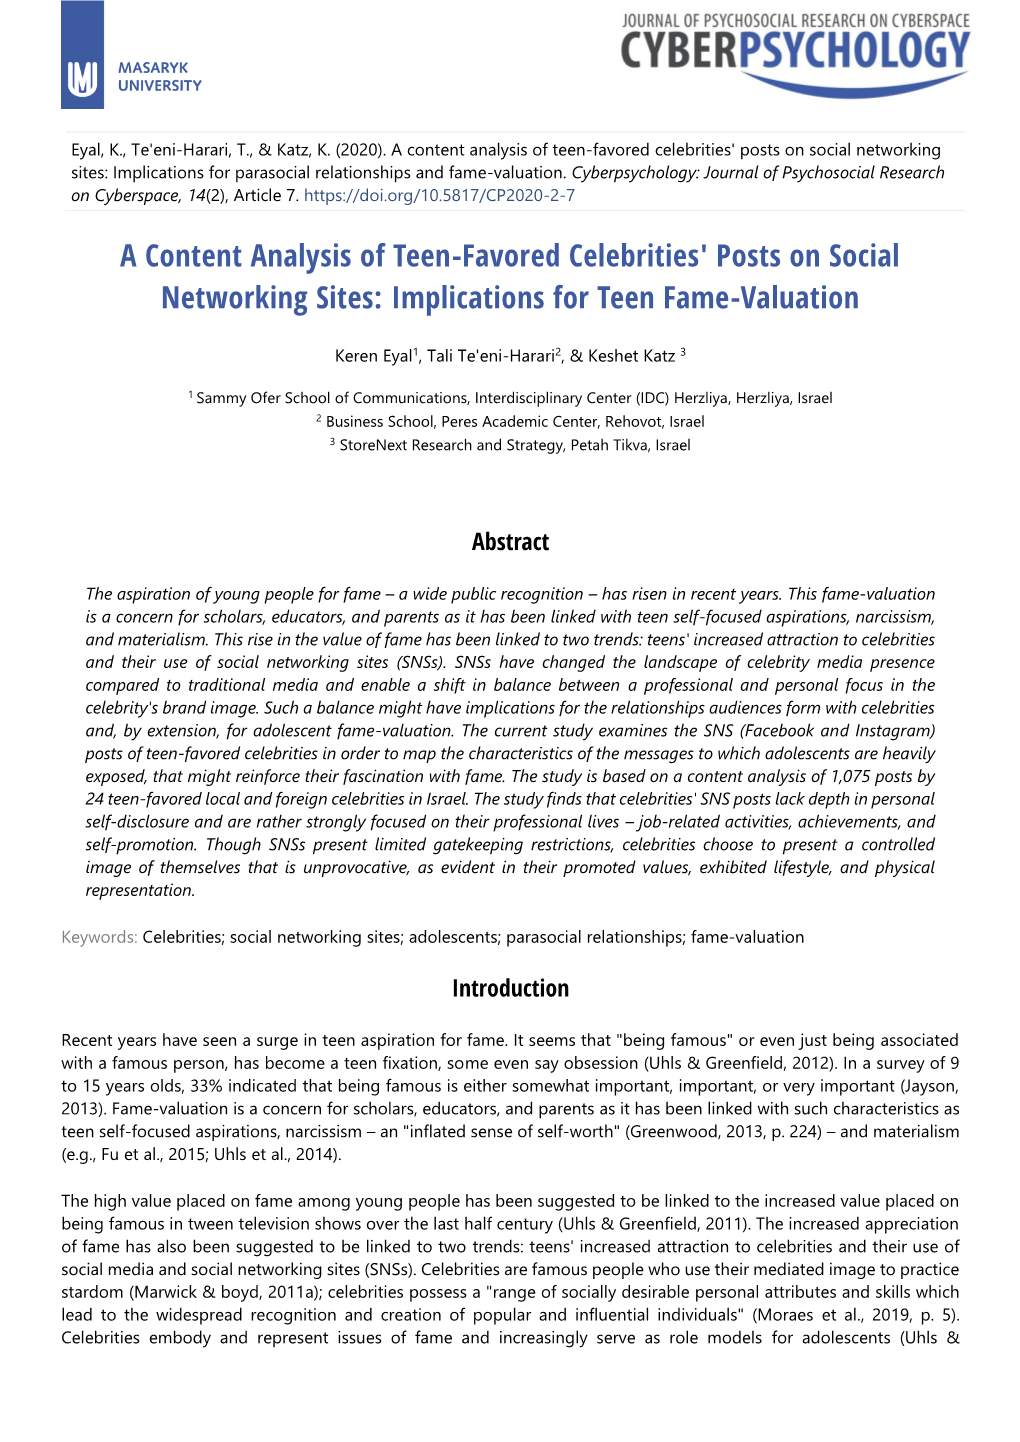 A Content Analysis of Teen-Favored Celebrities' Posts on Social Networking Sites: Implications for Parasocial Relationships and Fame-Valuation